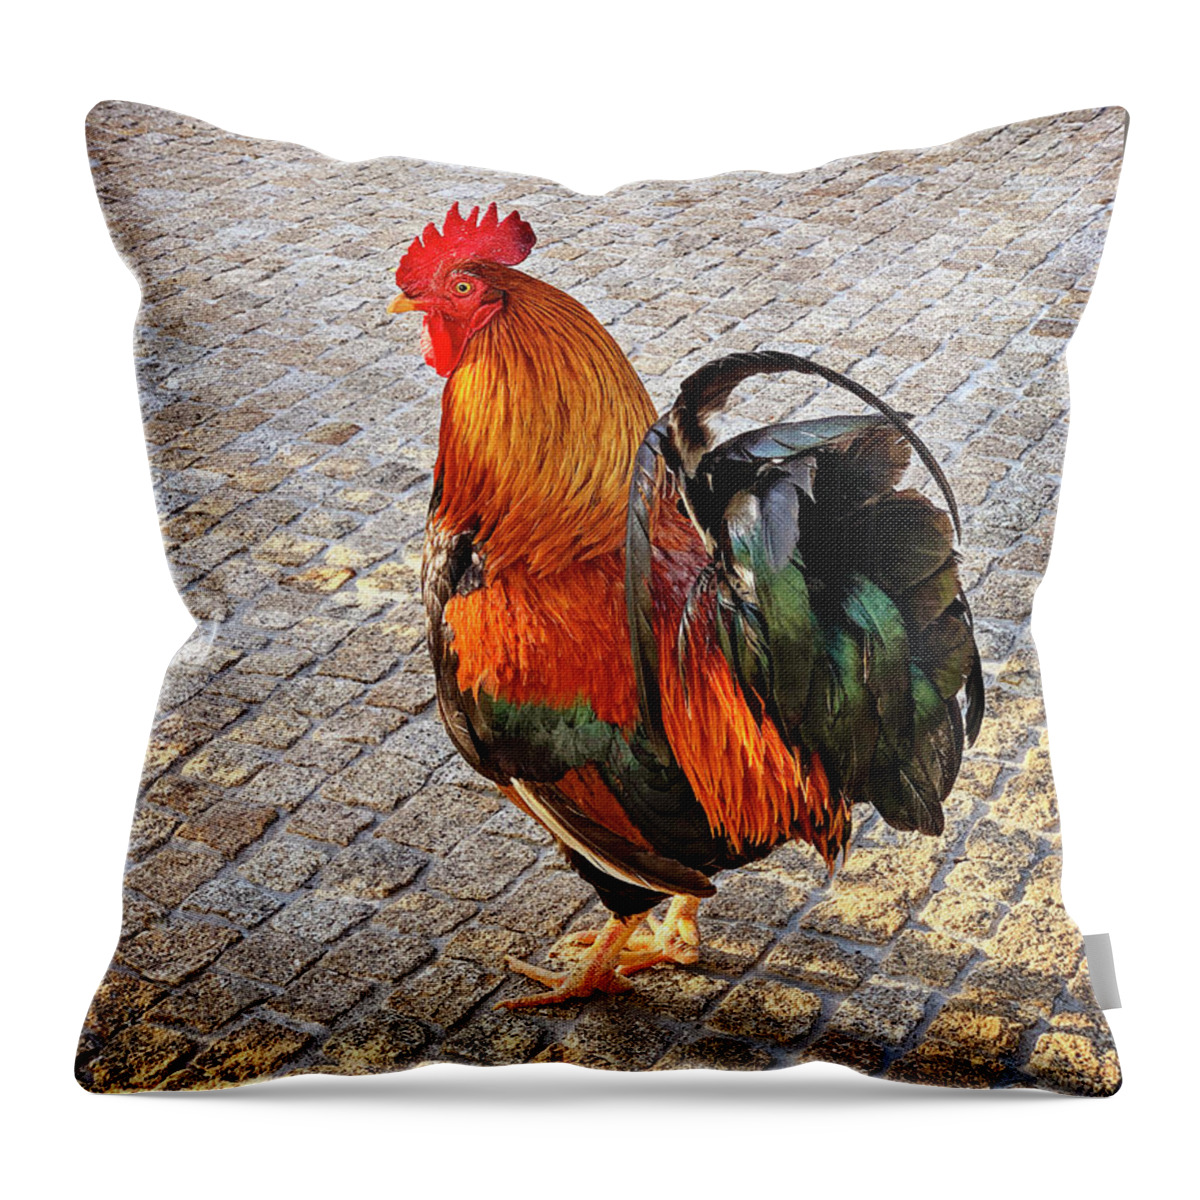 Rooster Throw Pillow featuring the photograph Rooster Strut by Jill Love